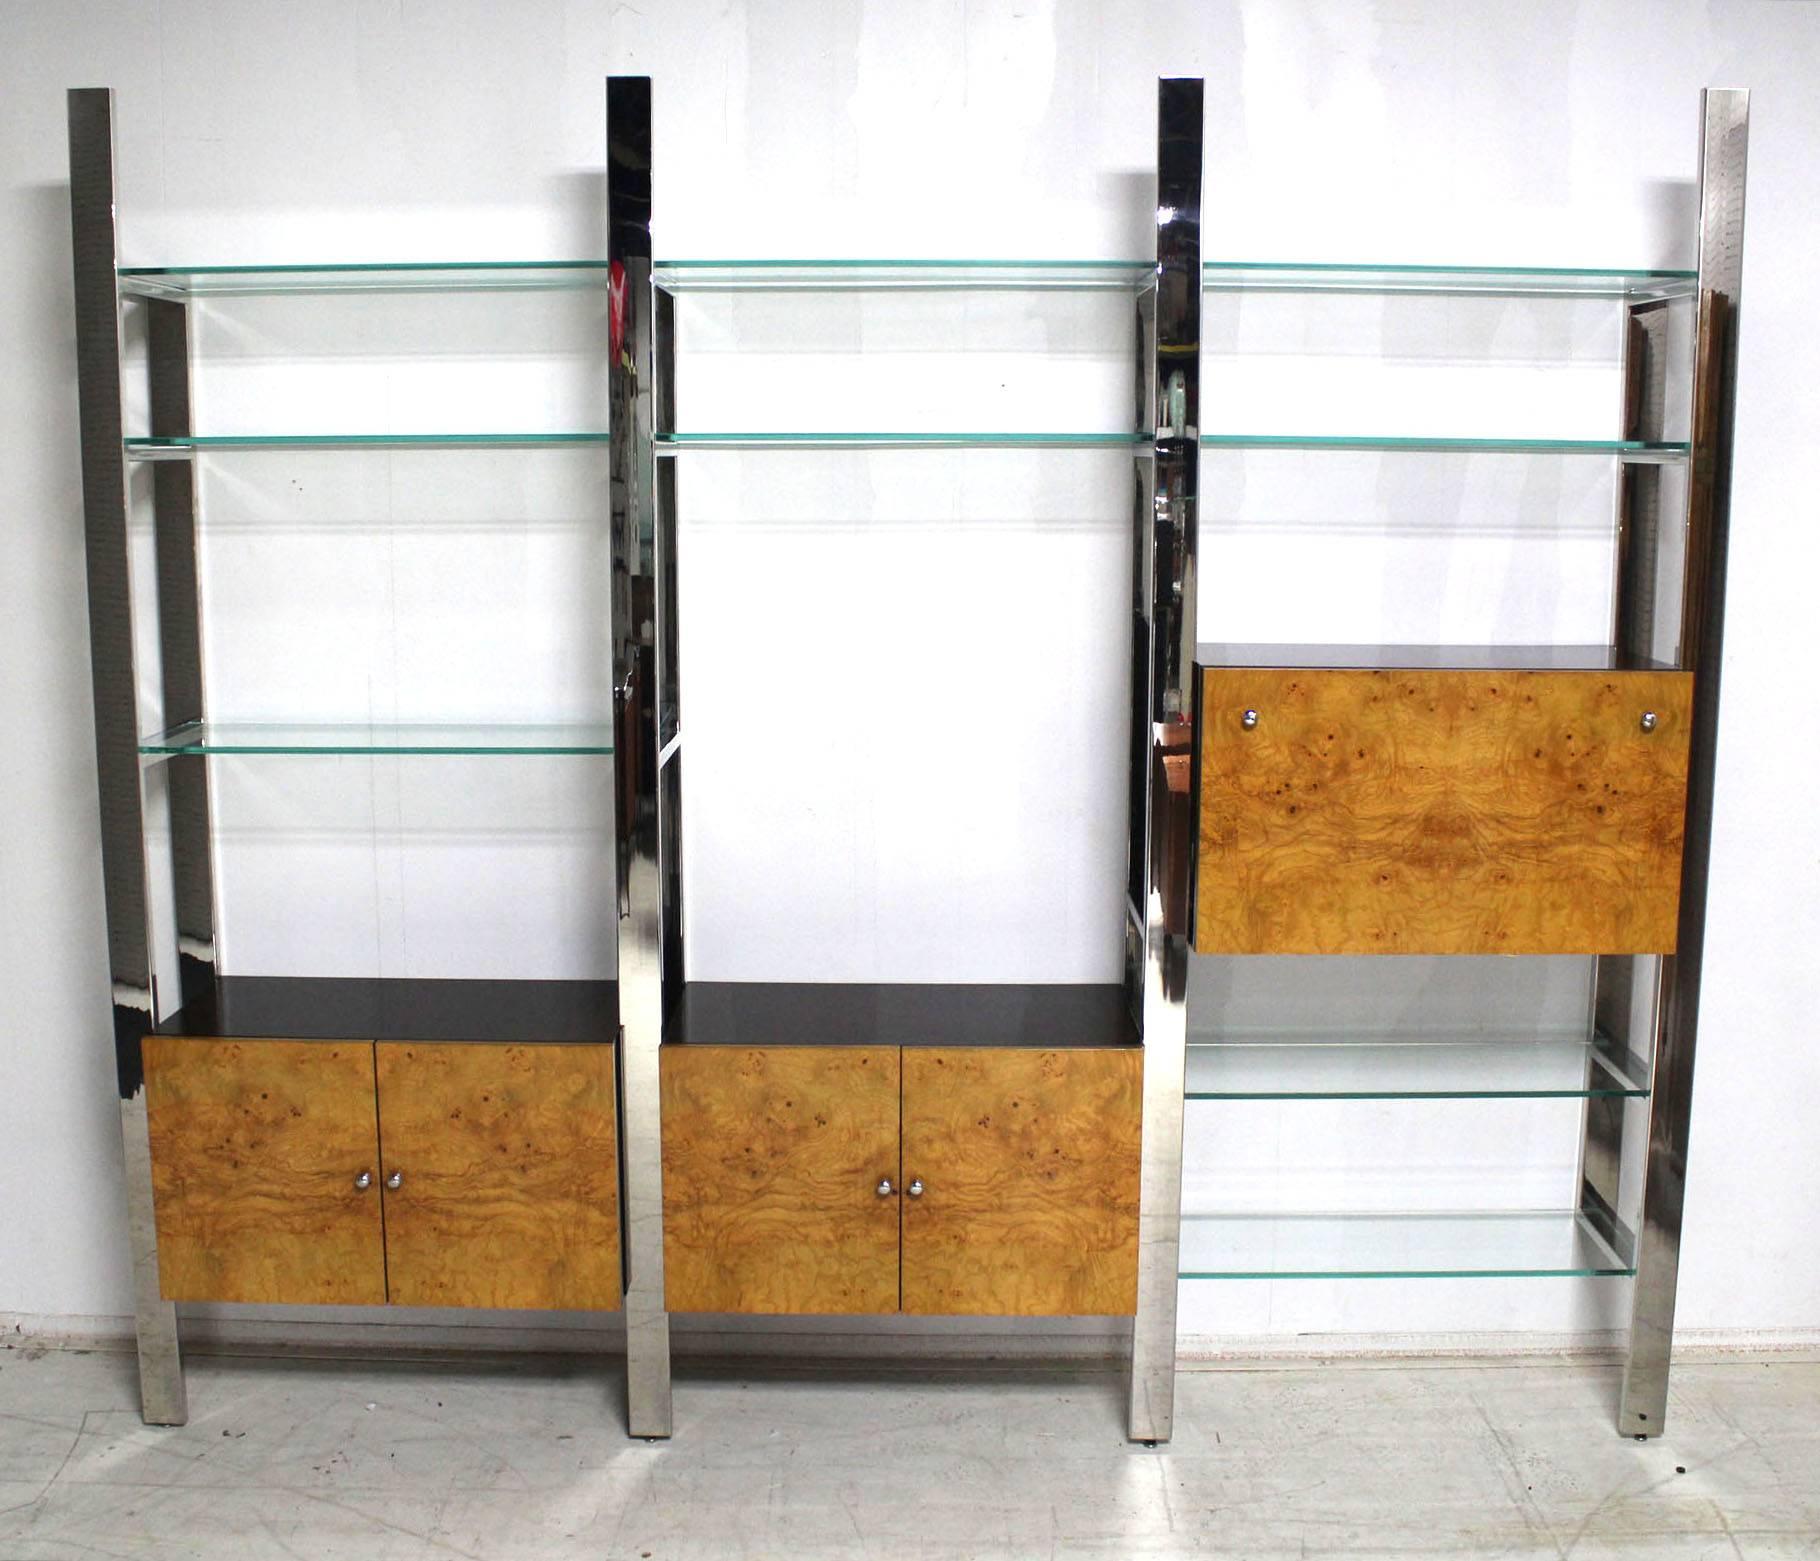 20th Century Burl Wood Thick Glass Shelves 3 Bay Wall Unit For Sale